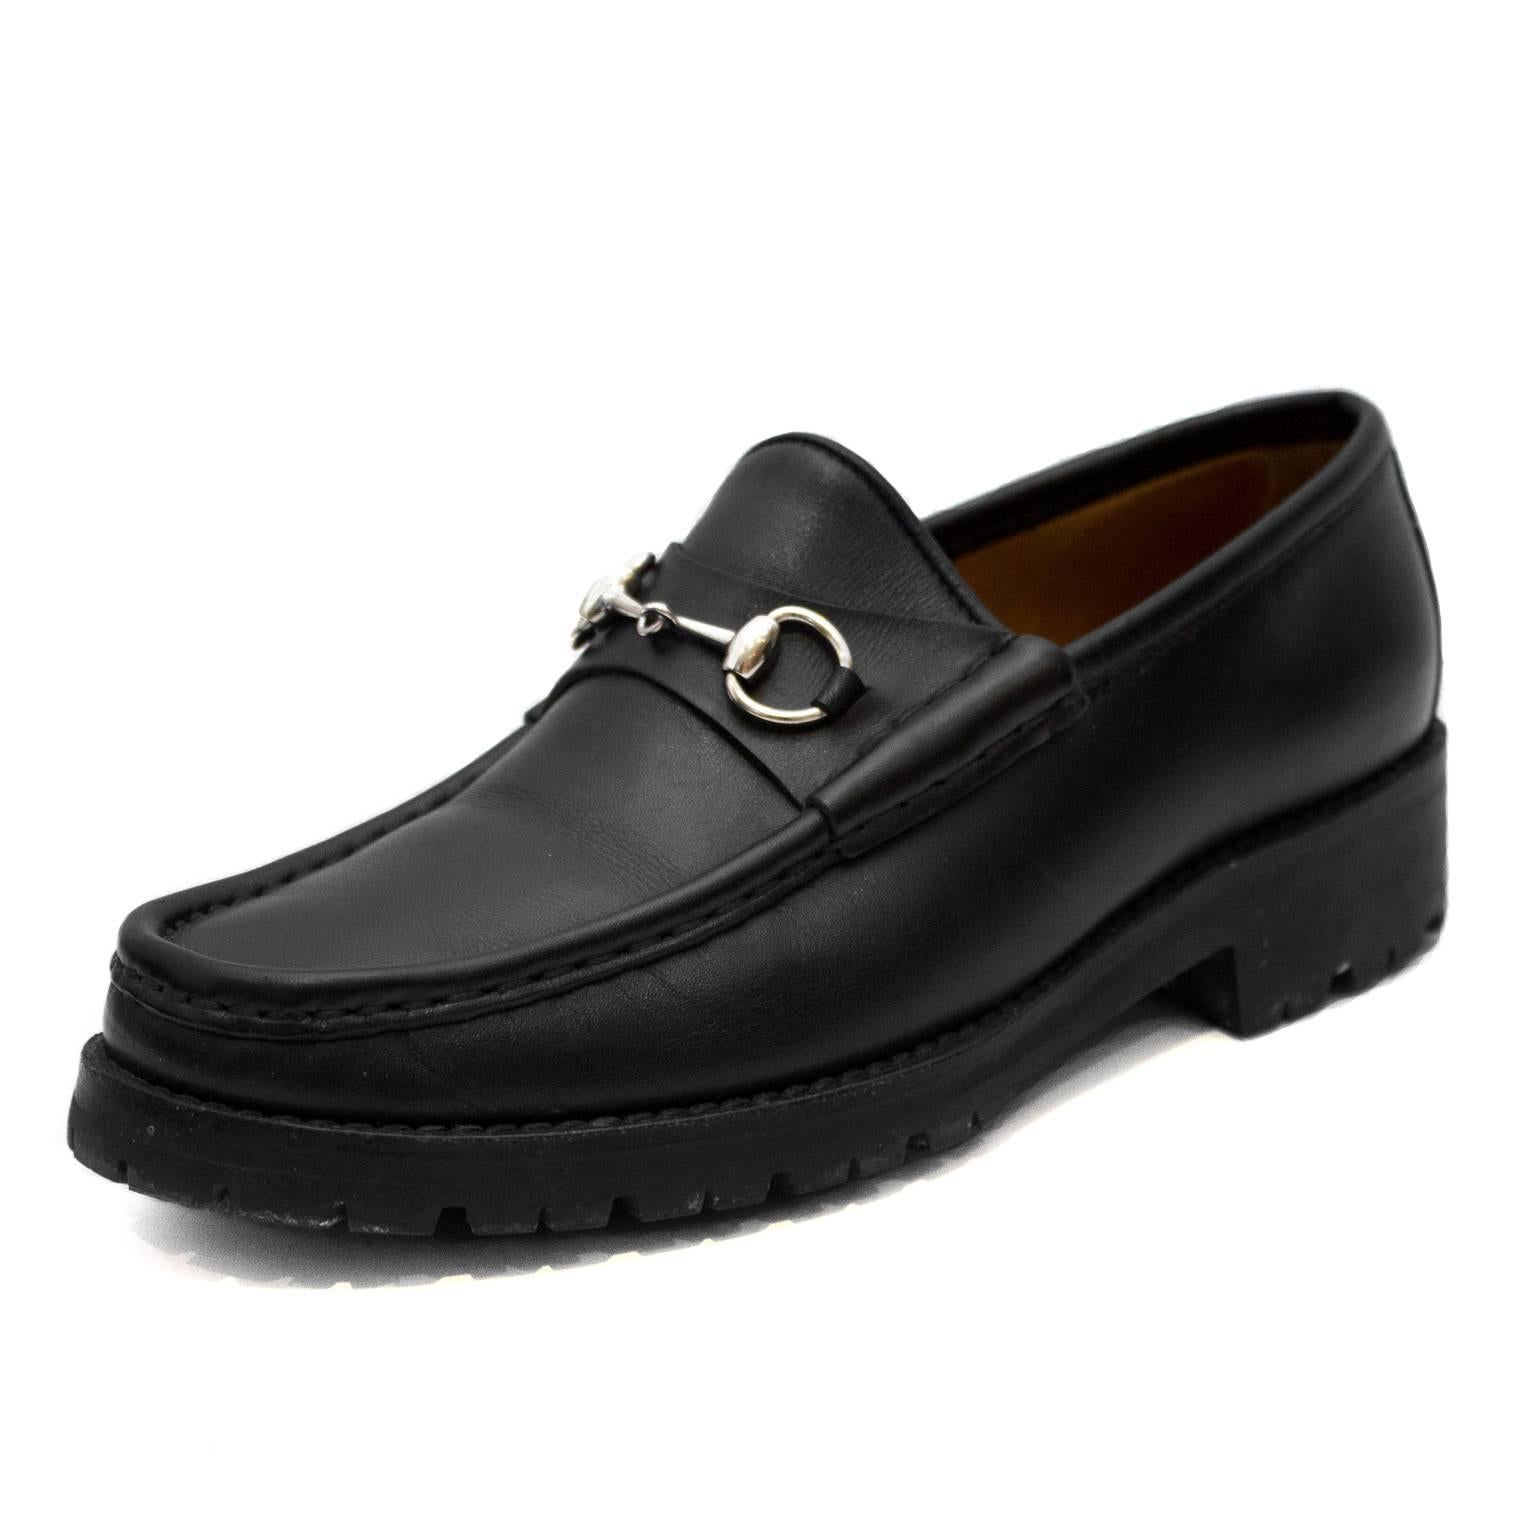 1990's Gucci black lug soled loafers with silver horse bit detail. Flat matte black leather. Interior is tan leather. Size 7b. Excellent condition. Classic and timeless.